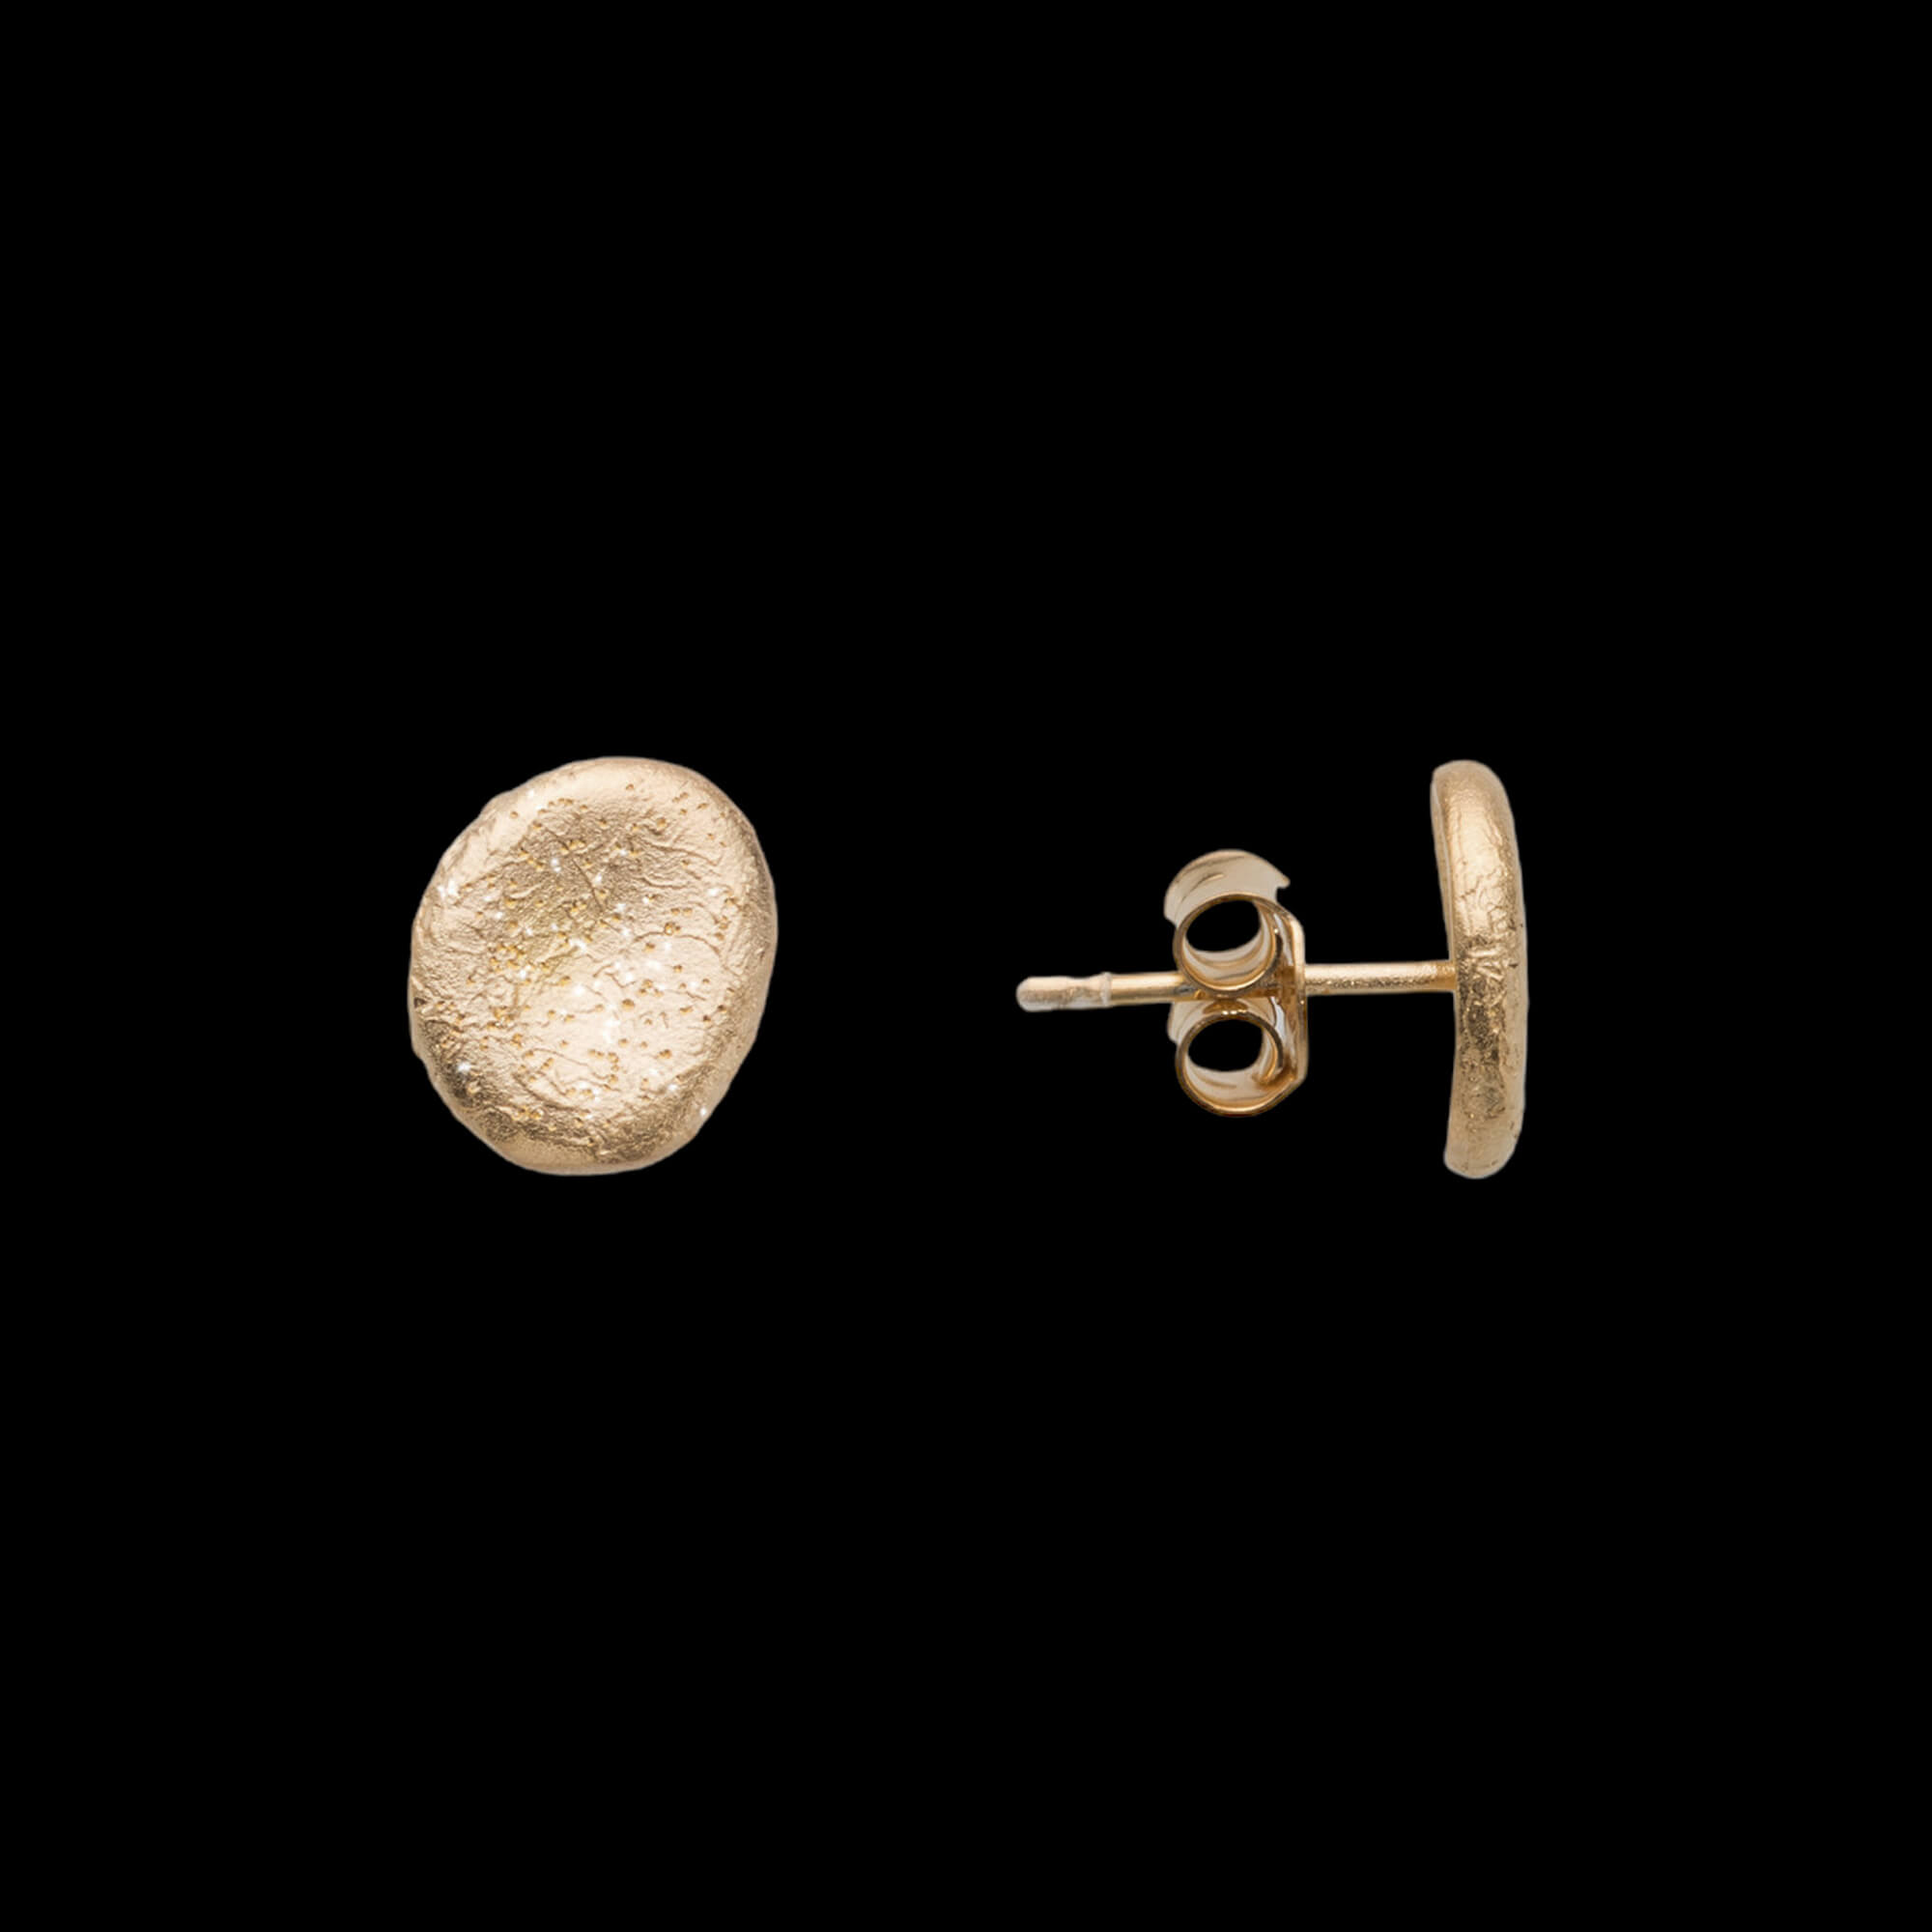 Gilded small and oval-shaped earrings, diamonds